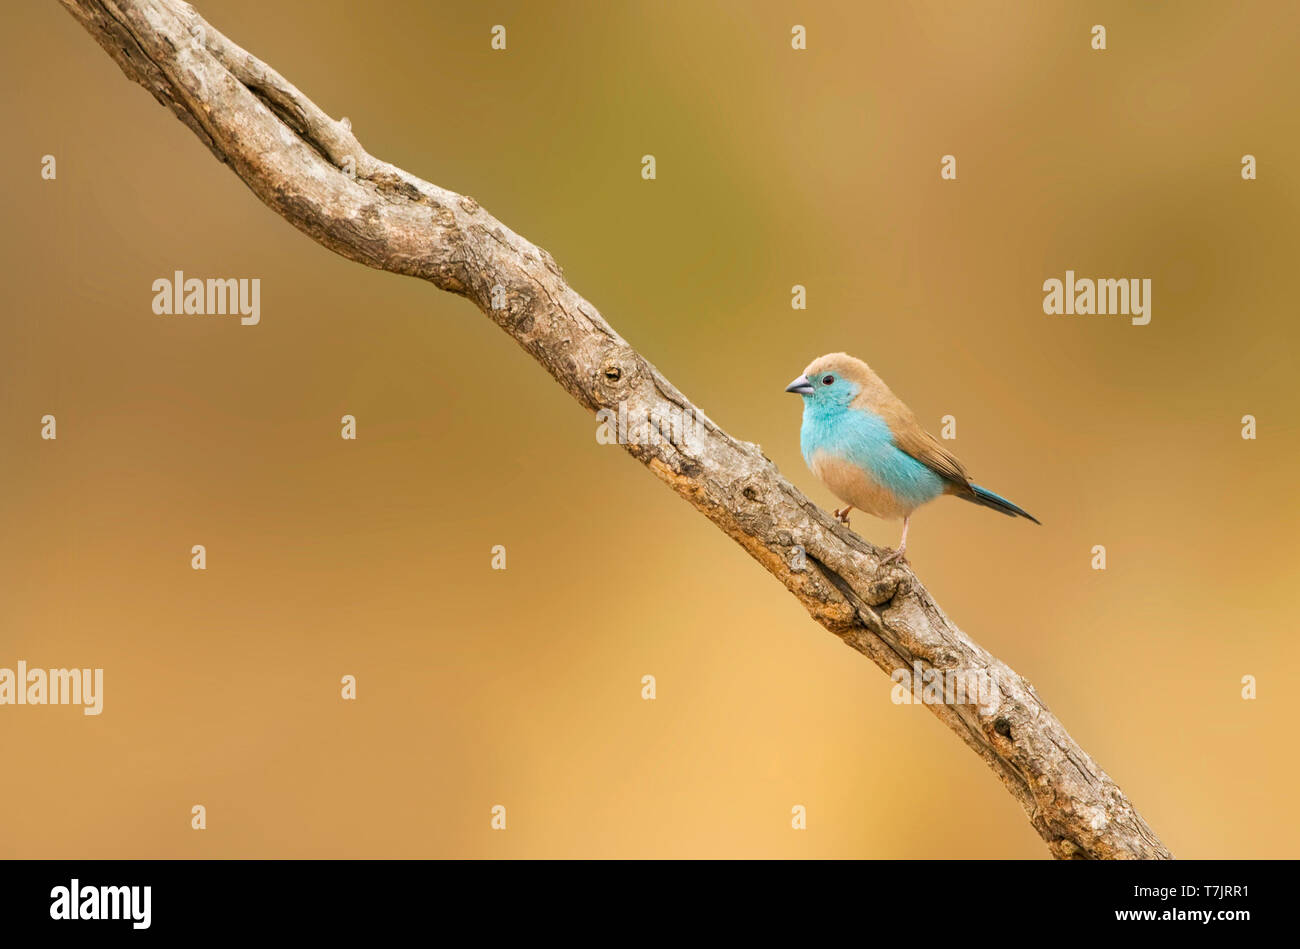 Blue Waxbill (Uraeginthus angolensis), also known as Southerm Cordon-bleu, in Kruger National park South Africa. Perched on a stick  against a brown n Stock Photo